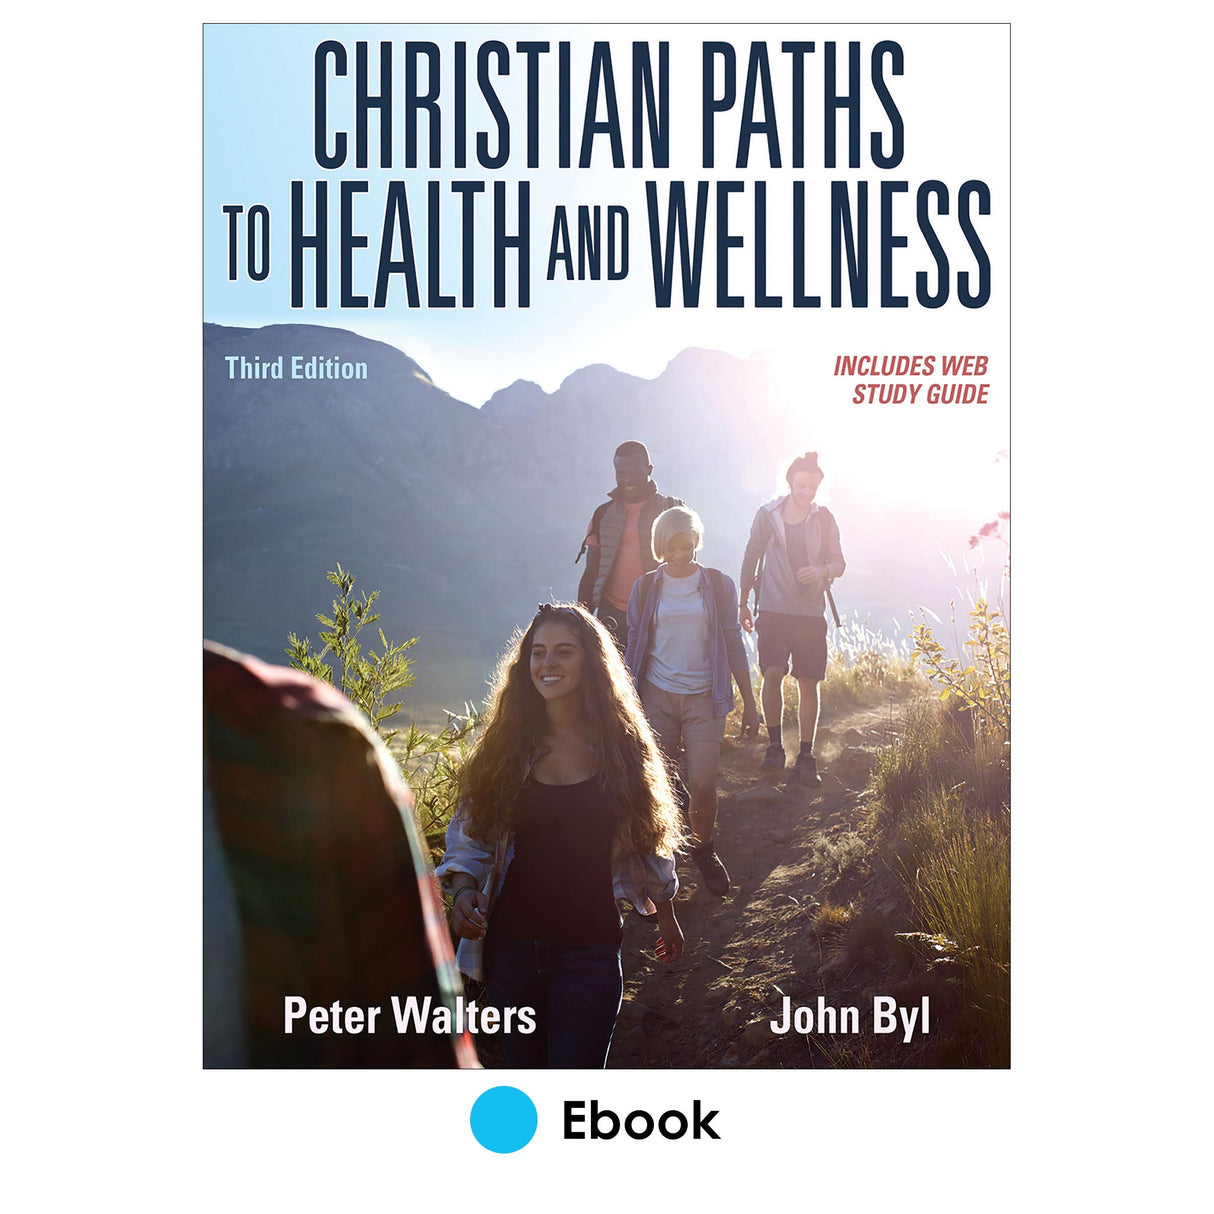 Christian Paths to Health and Wellness 3rd Edition epub With Web Study Guide